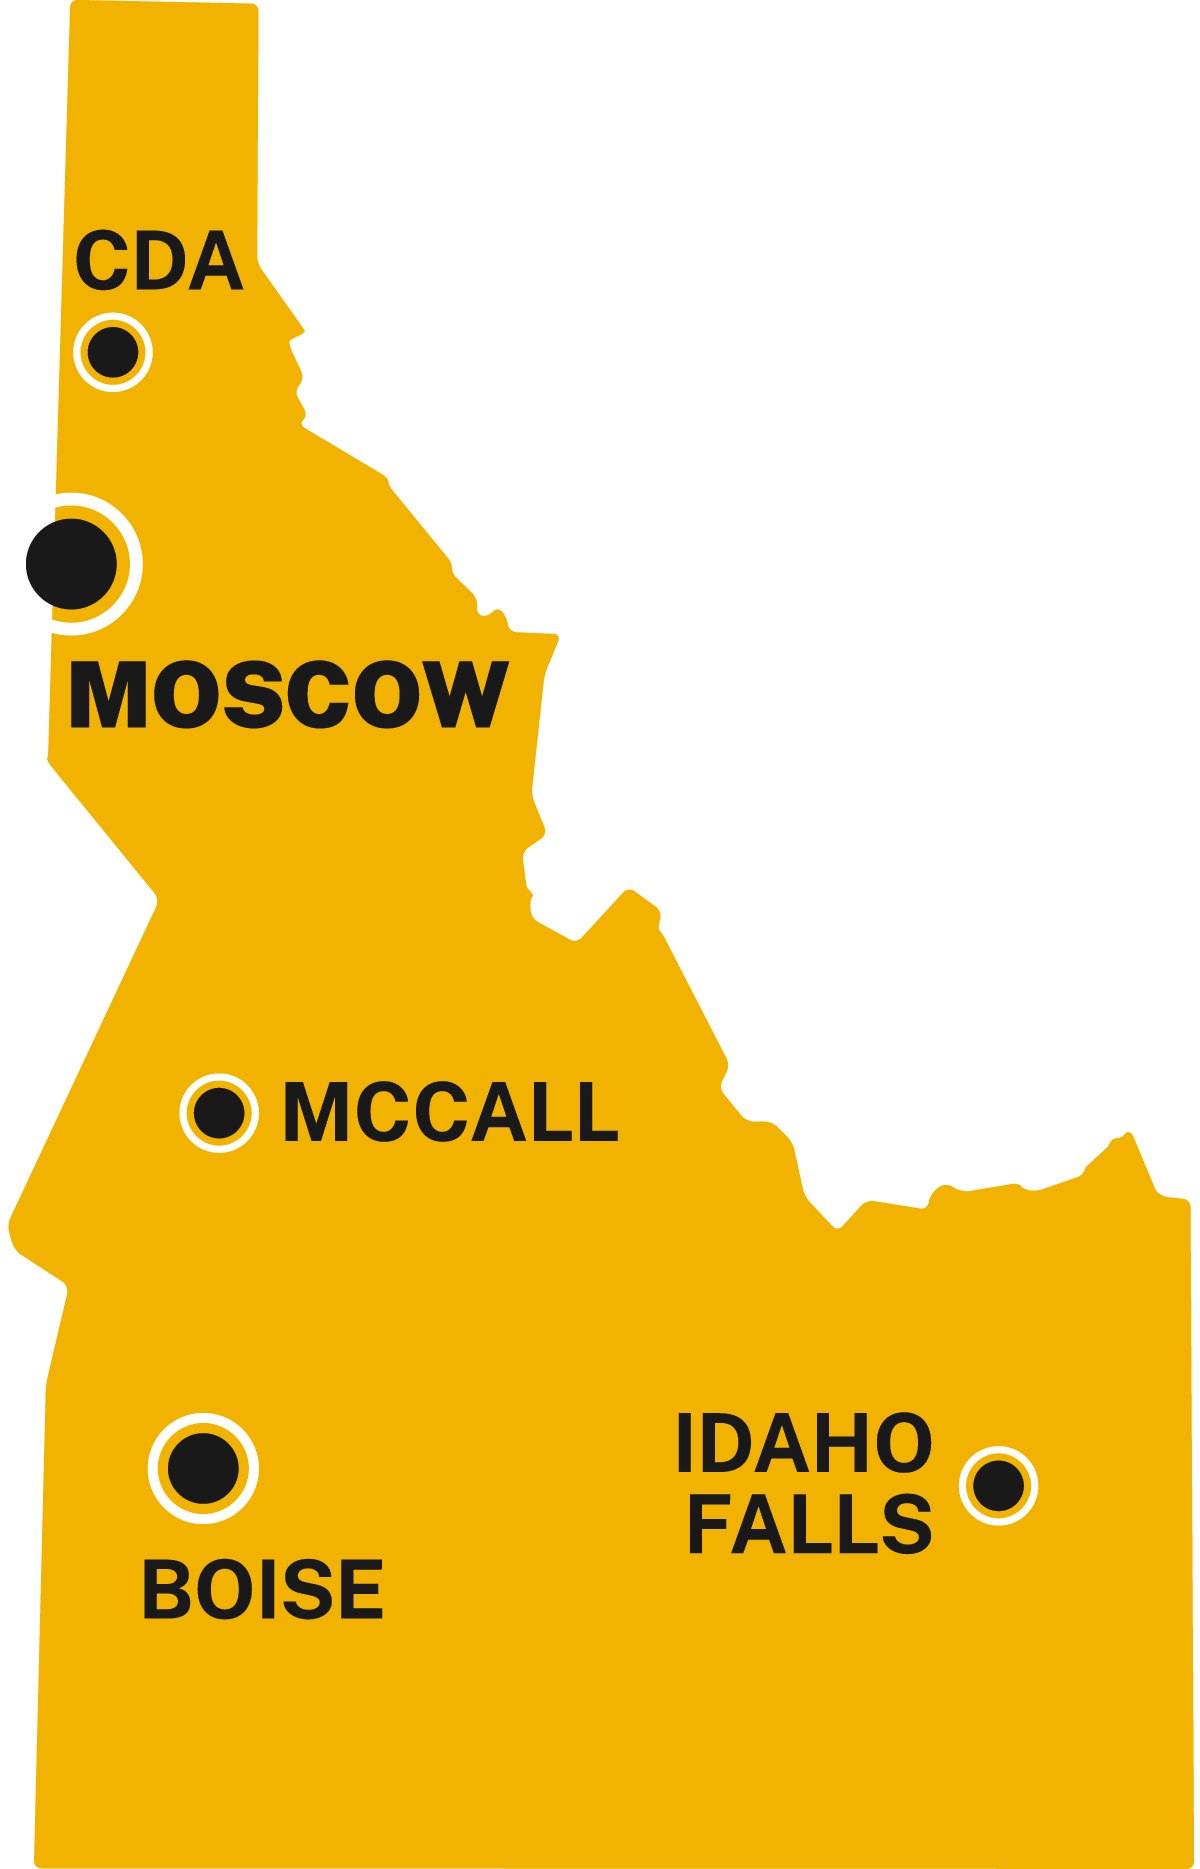 Graphic representation of Idaho and its campuses, research and extension centers in Coeur d’Alene, Moscow, Boise, Idaho Falls and Twin Falls.